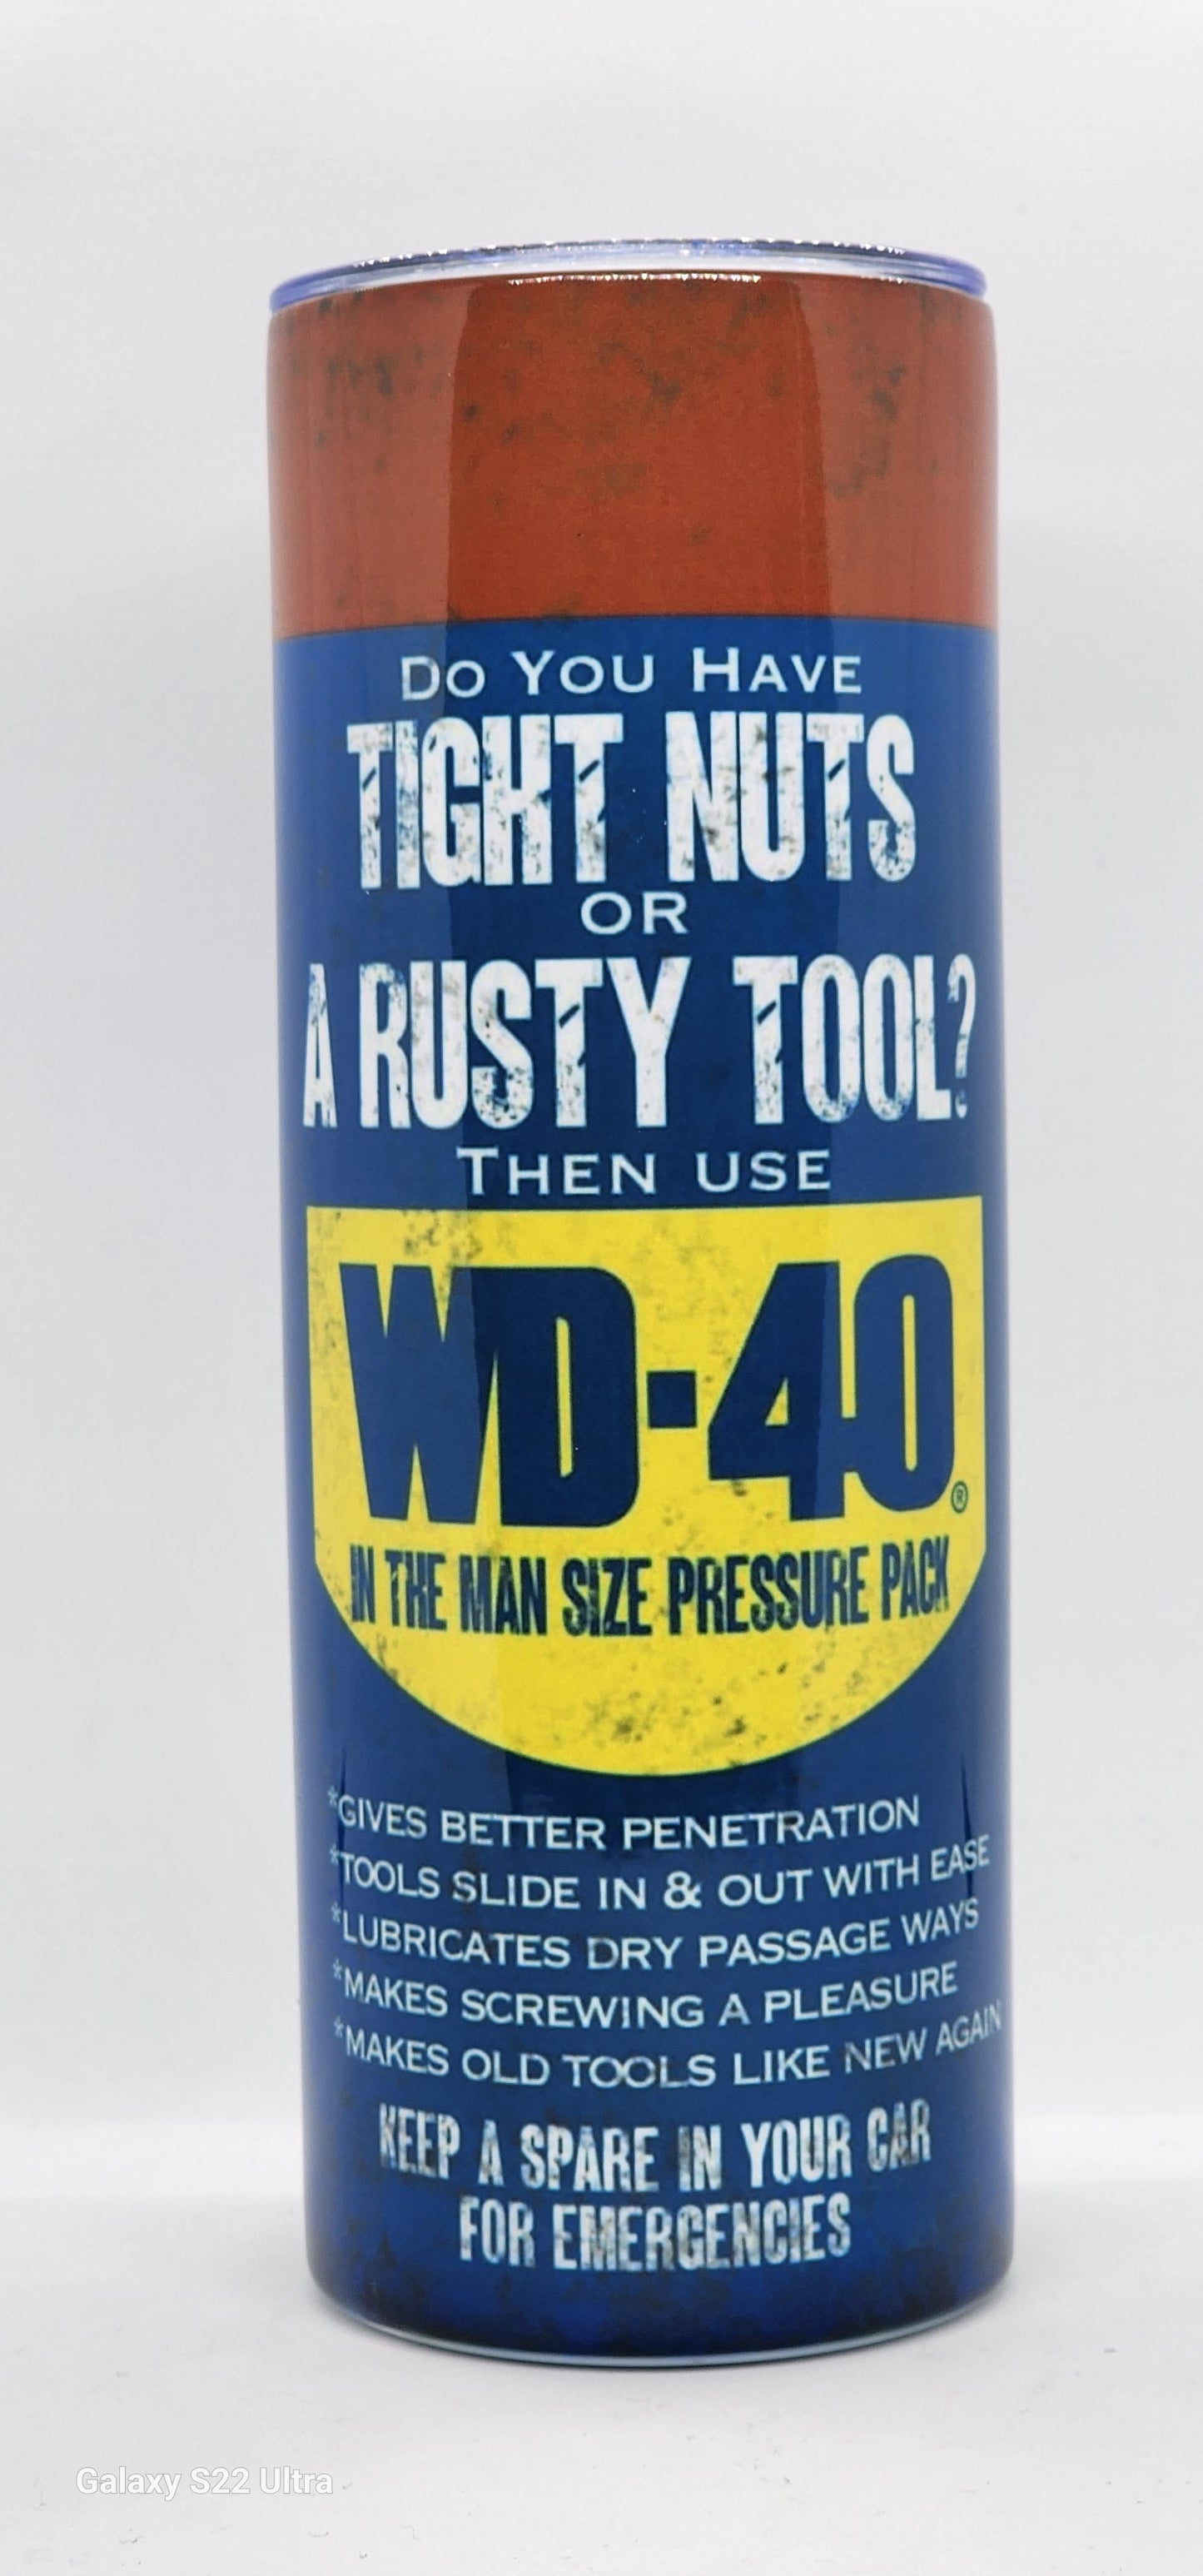 WD-40 Man Size Pressure Pack